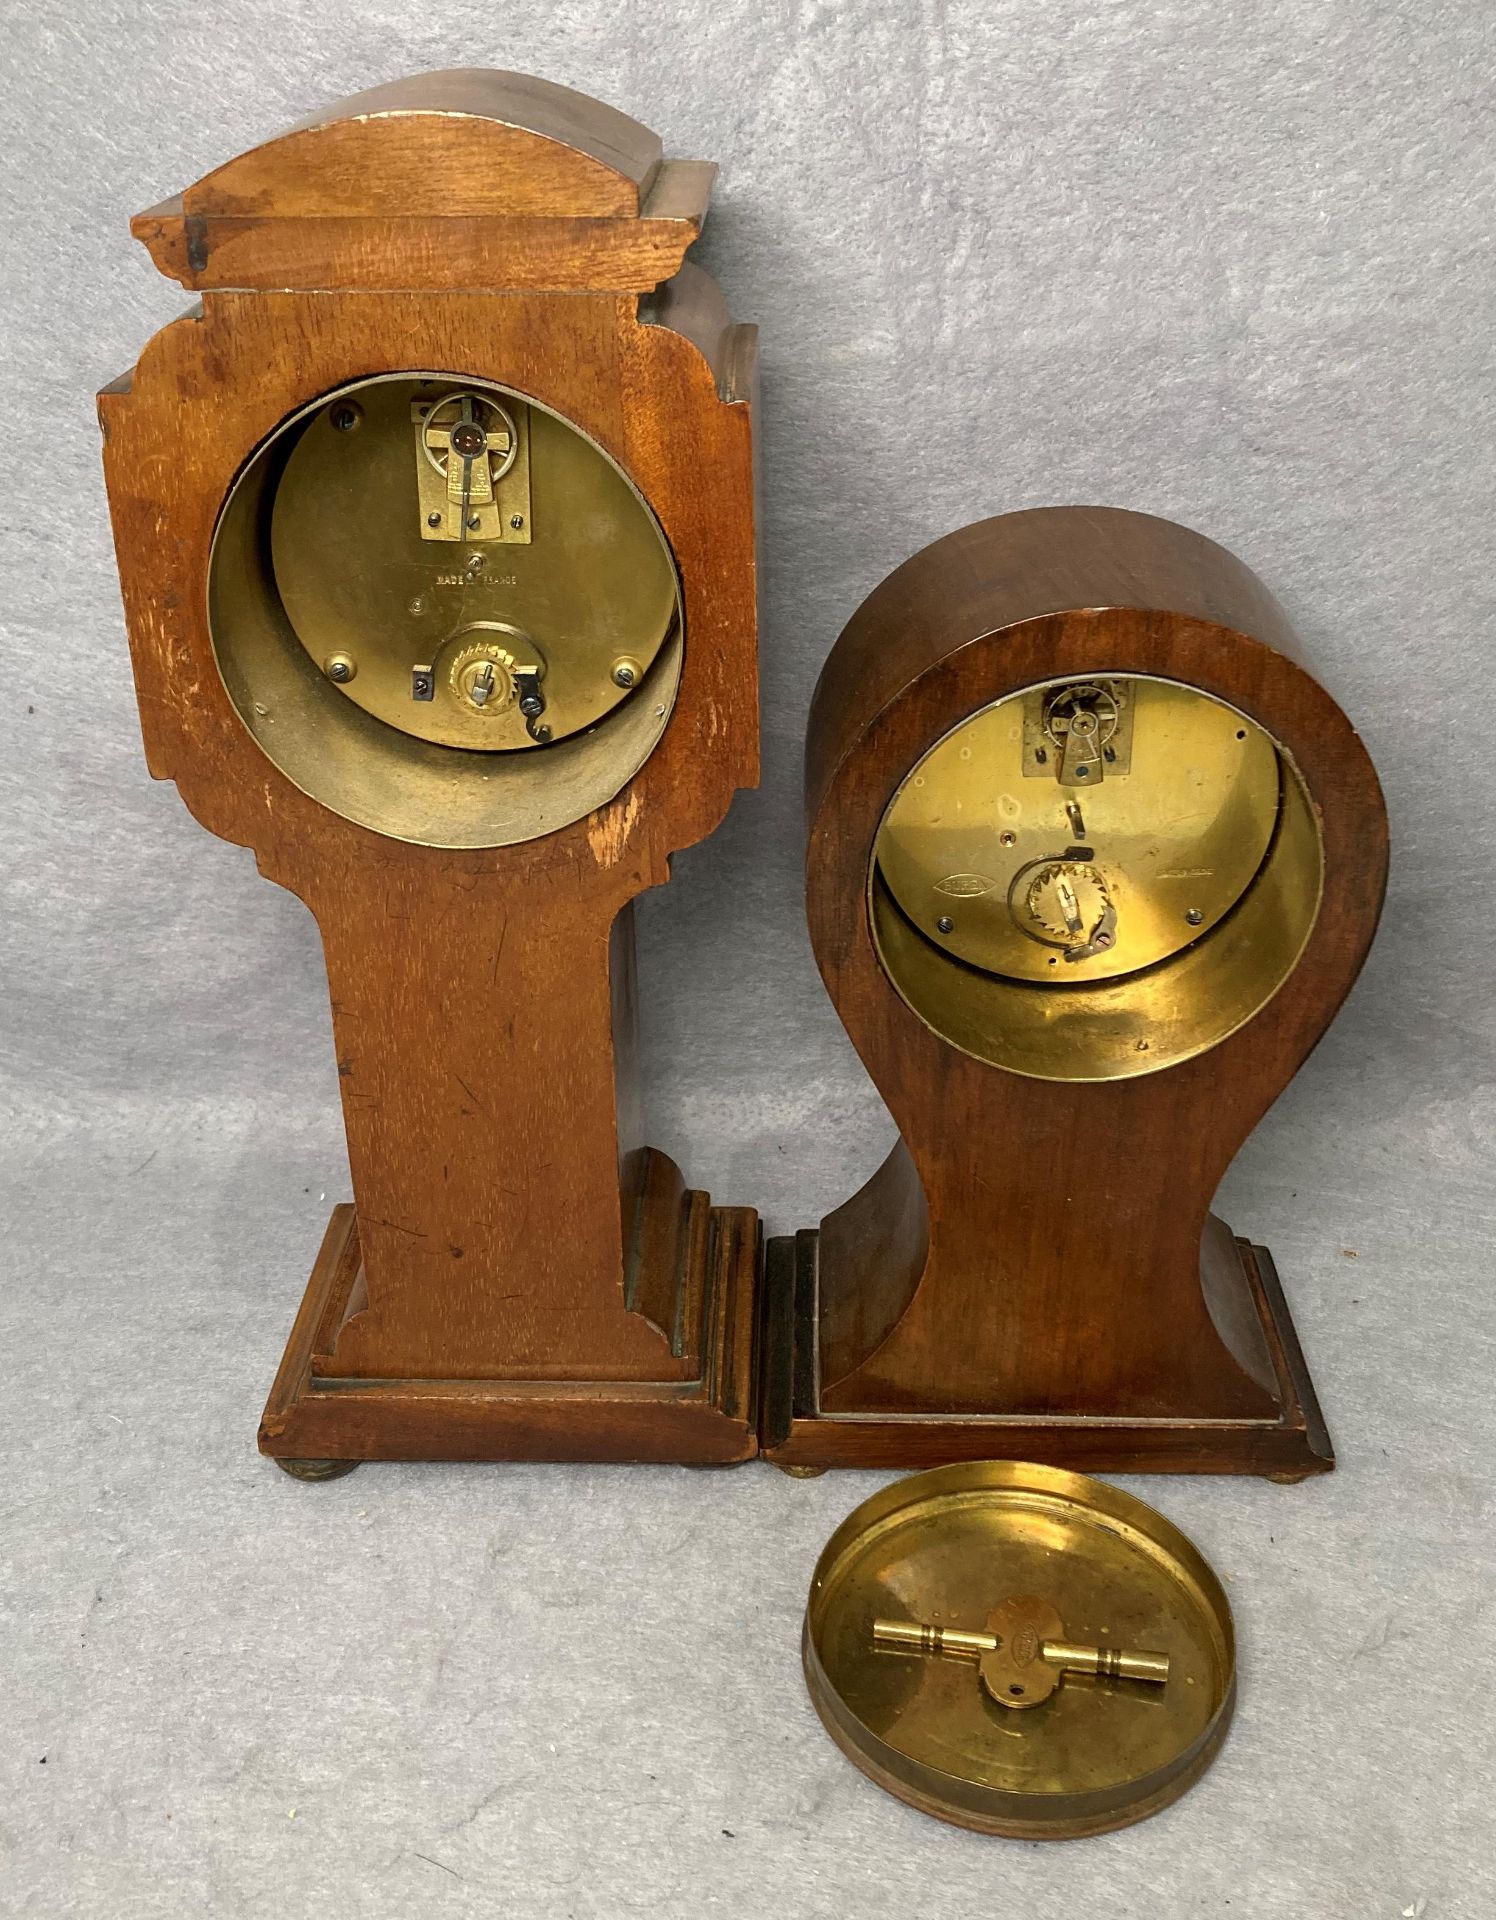 Two mahogany cased mantel clocks - one Swiss Made (23cm high) and one French Made (31cm high) - - Image 4 of 4